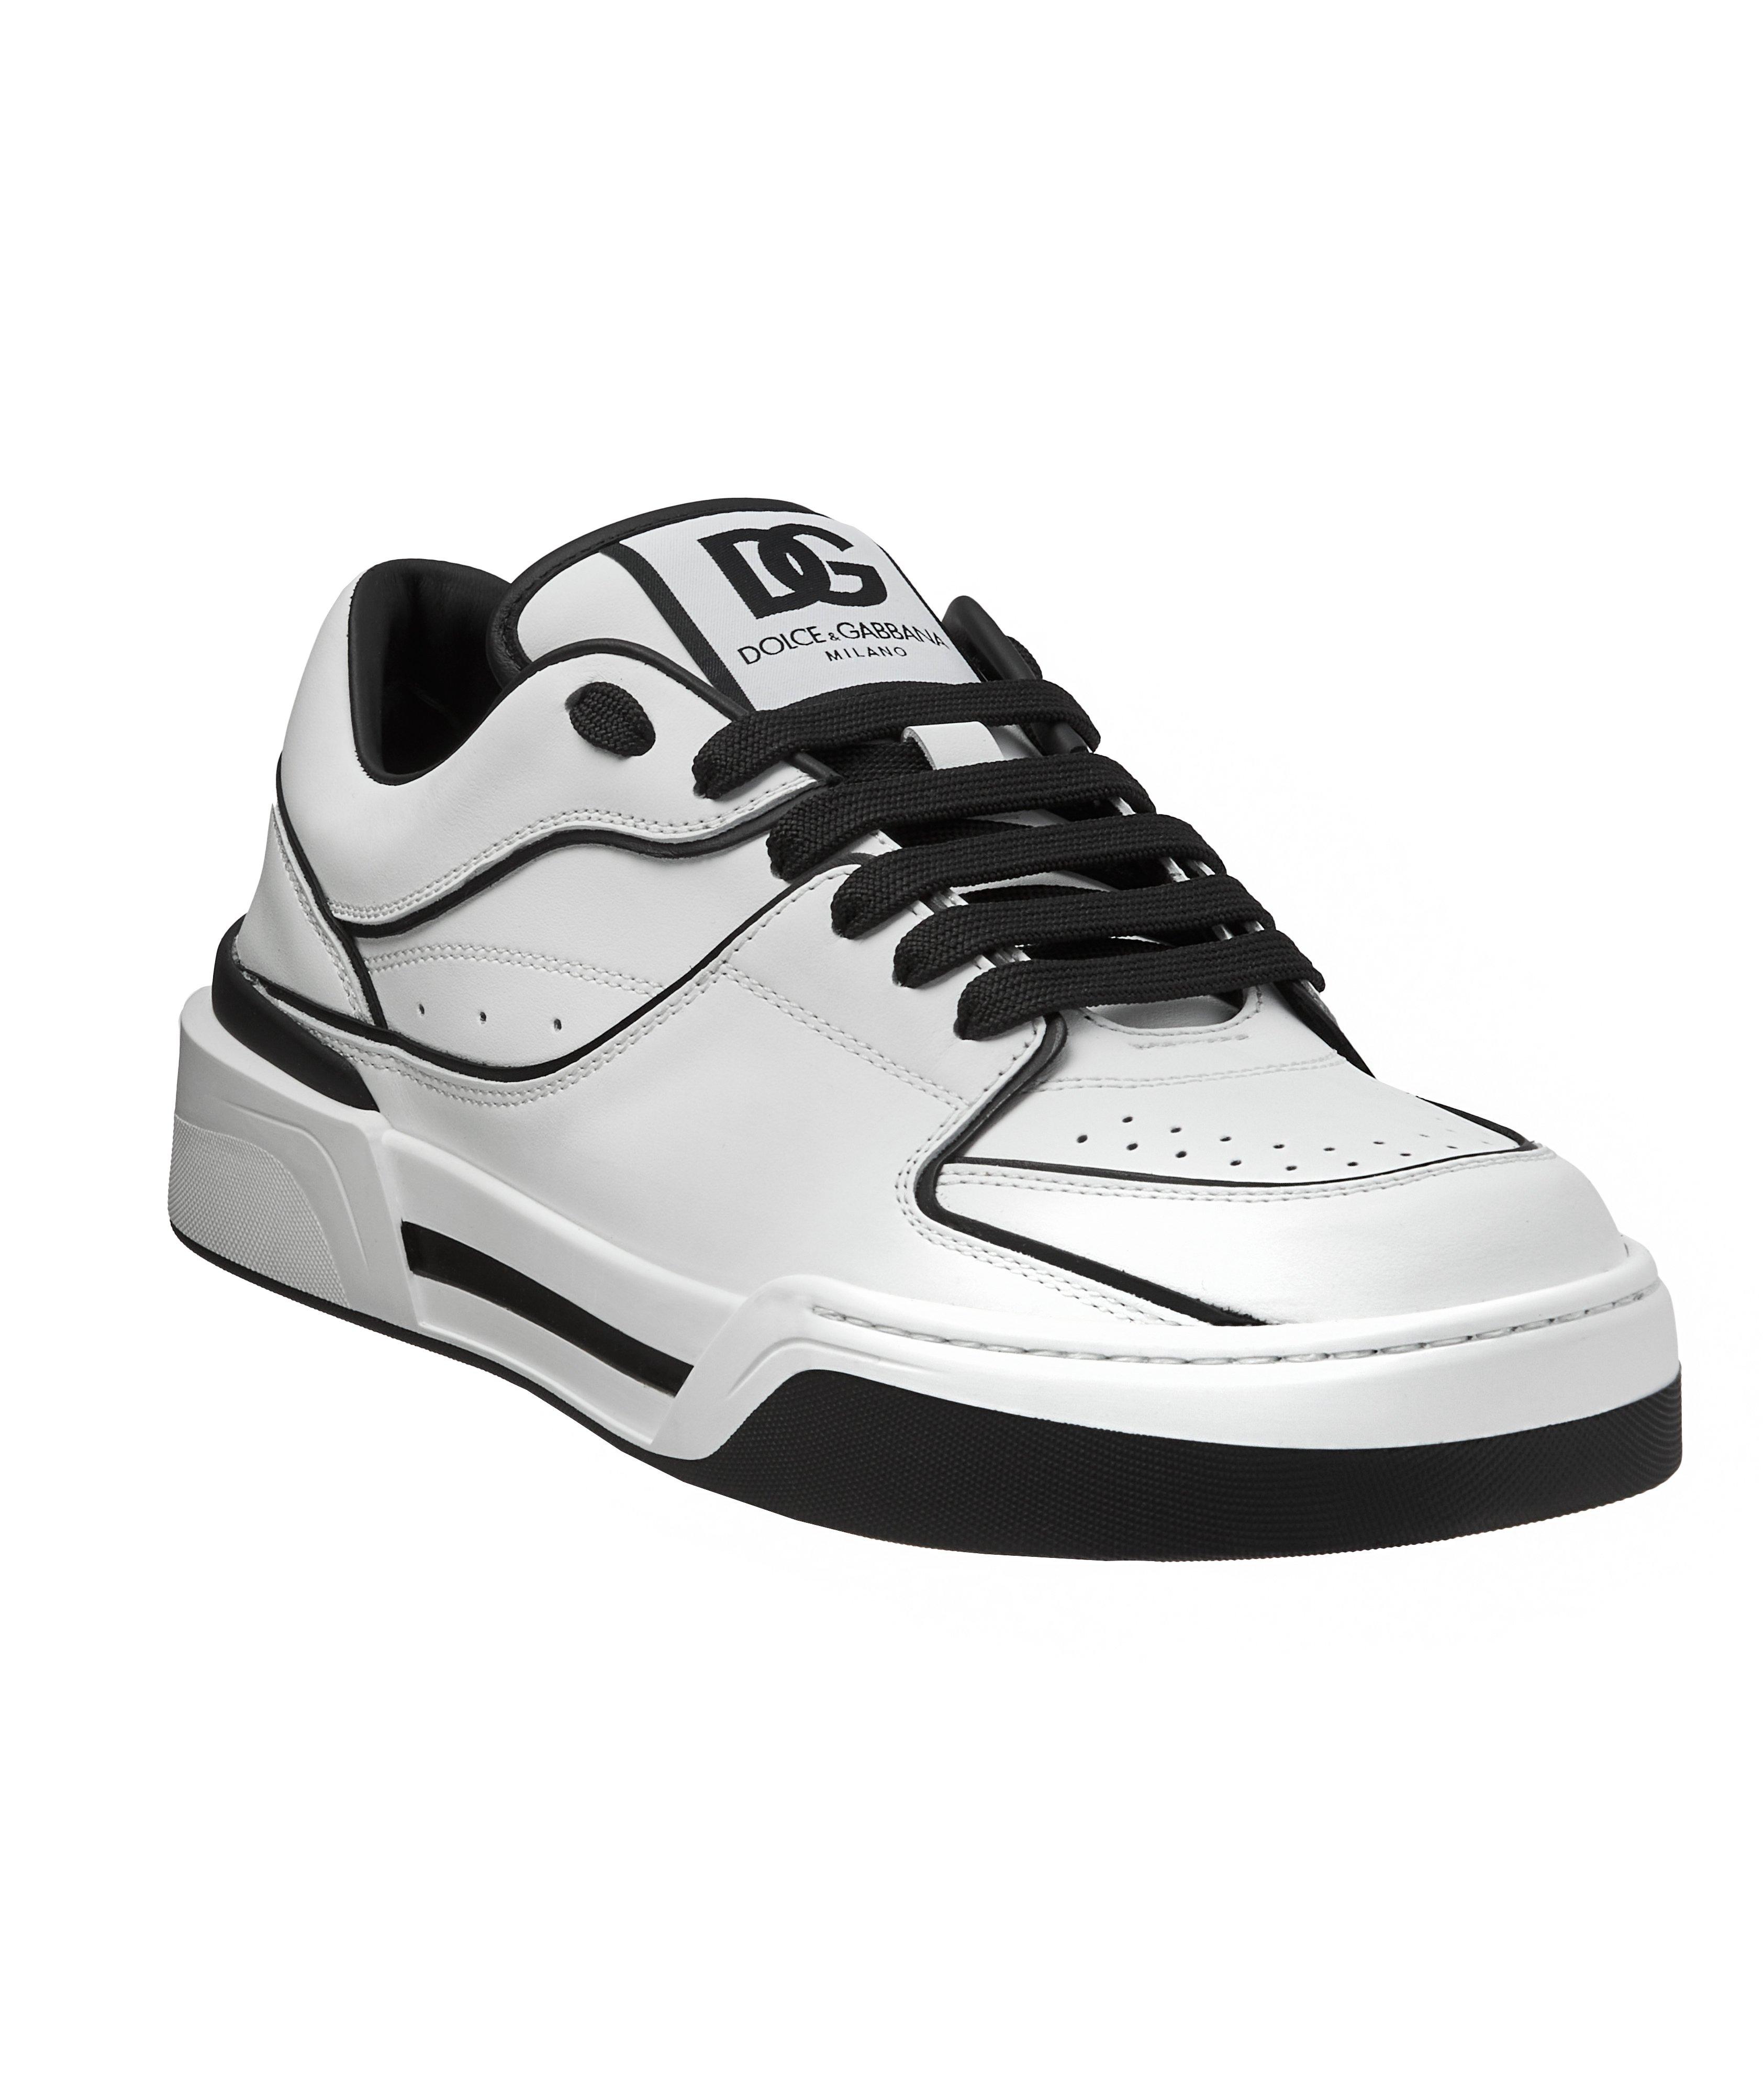 Chaussure sport New Roma en cuir image 0